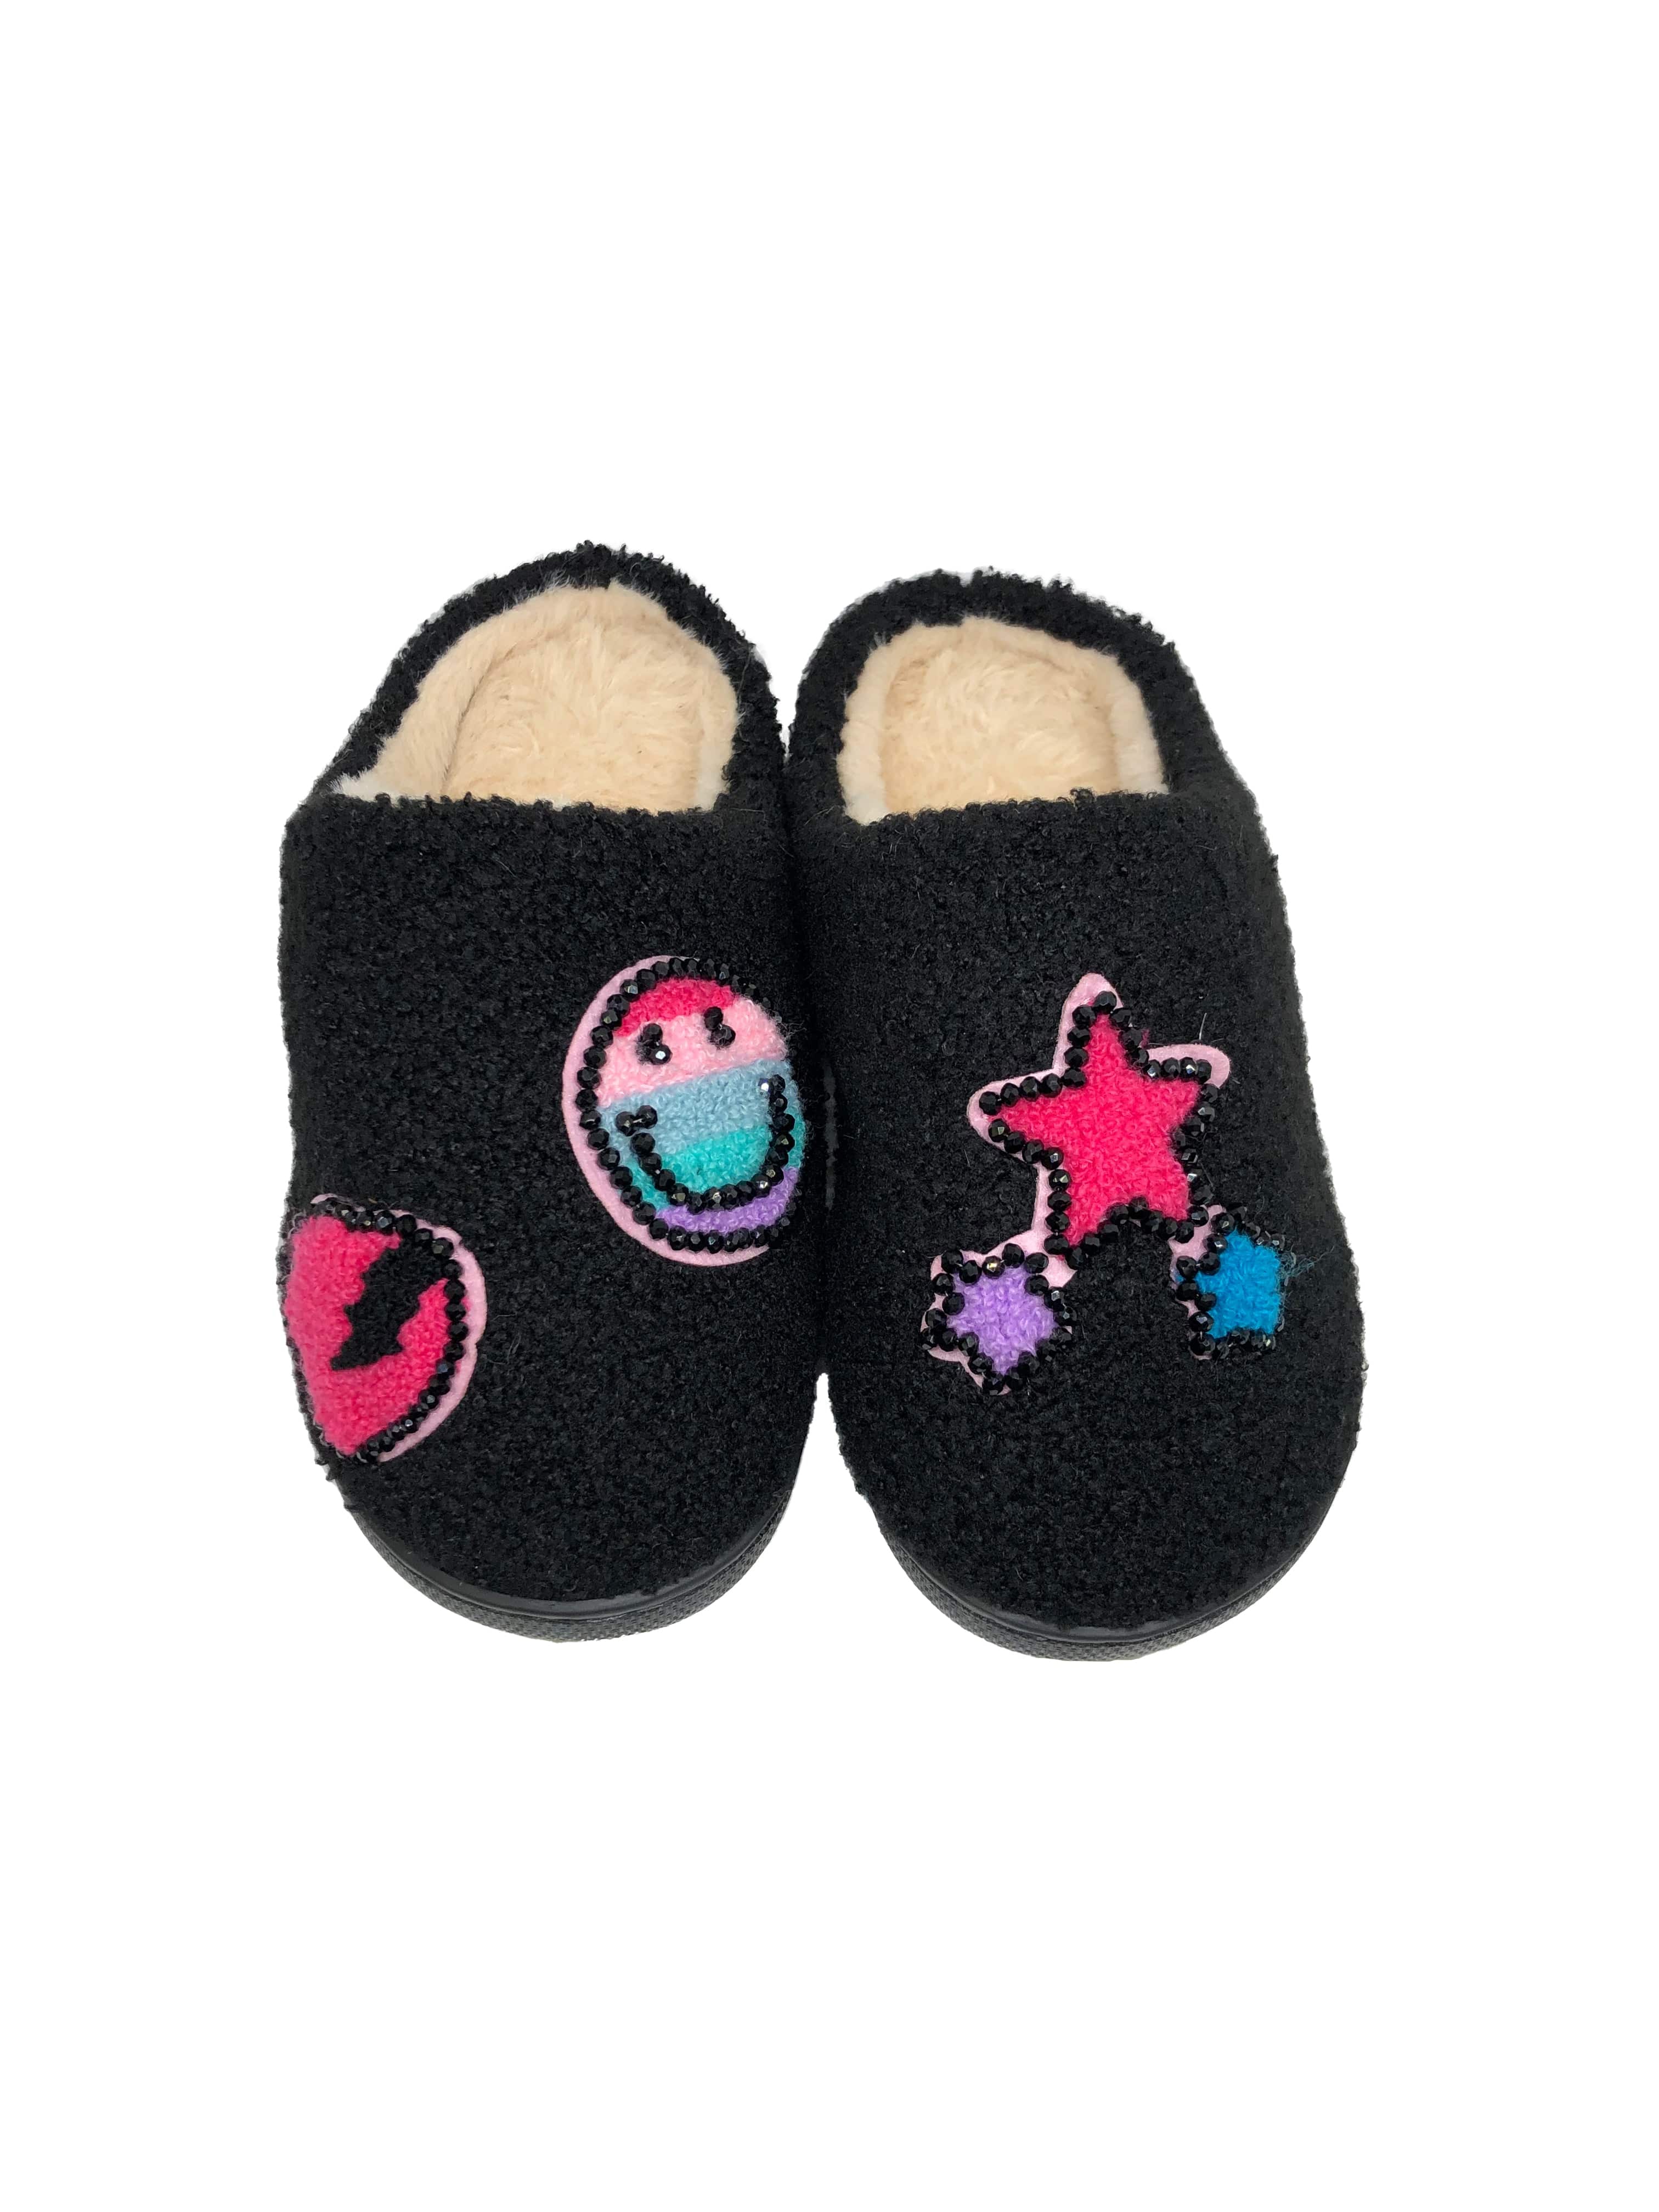 Girl's Embroidered Black Sherpa Patched Slippers - Twinkle Twinkle Little One